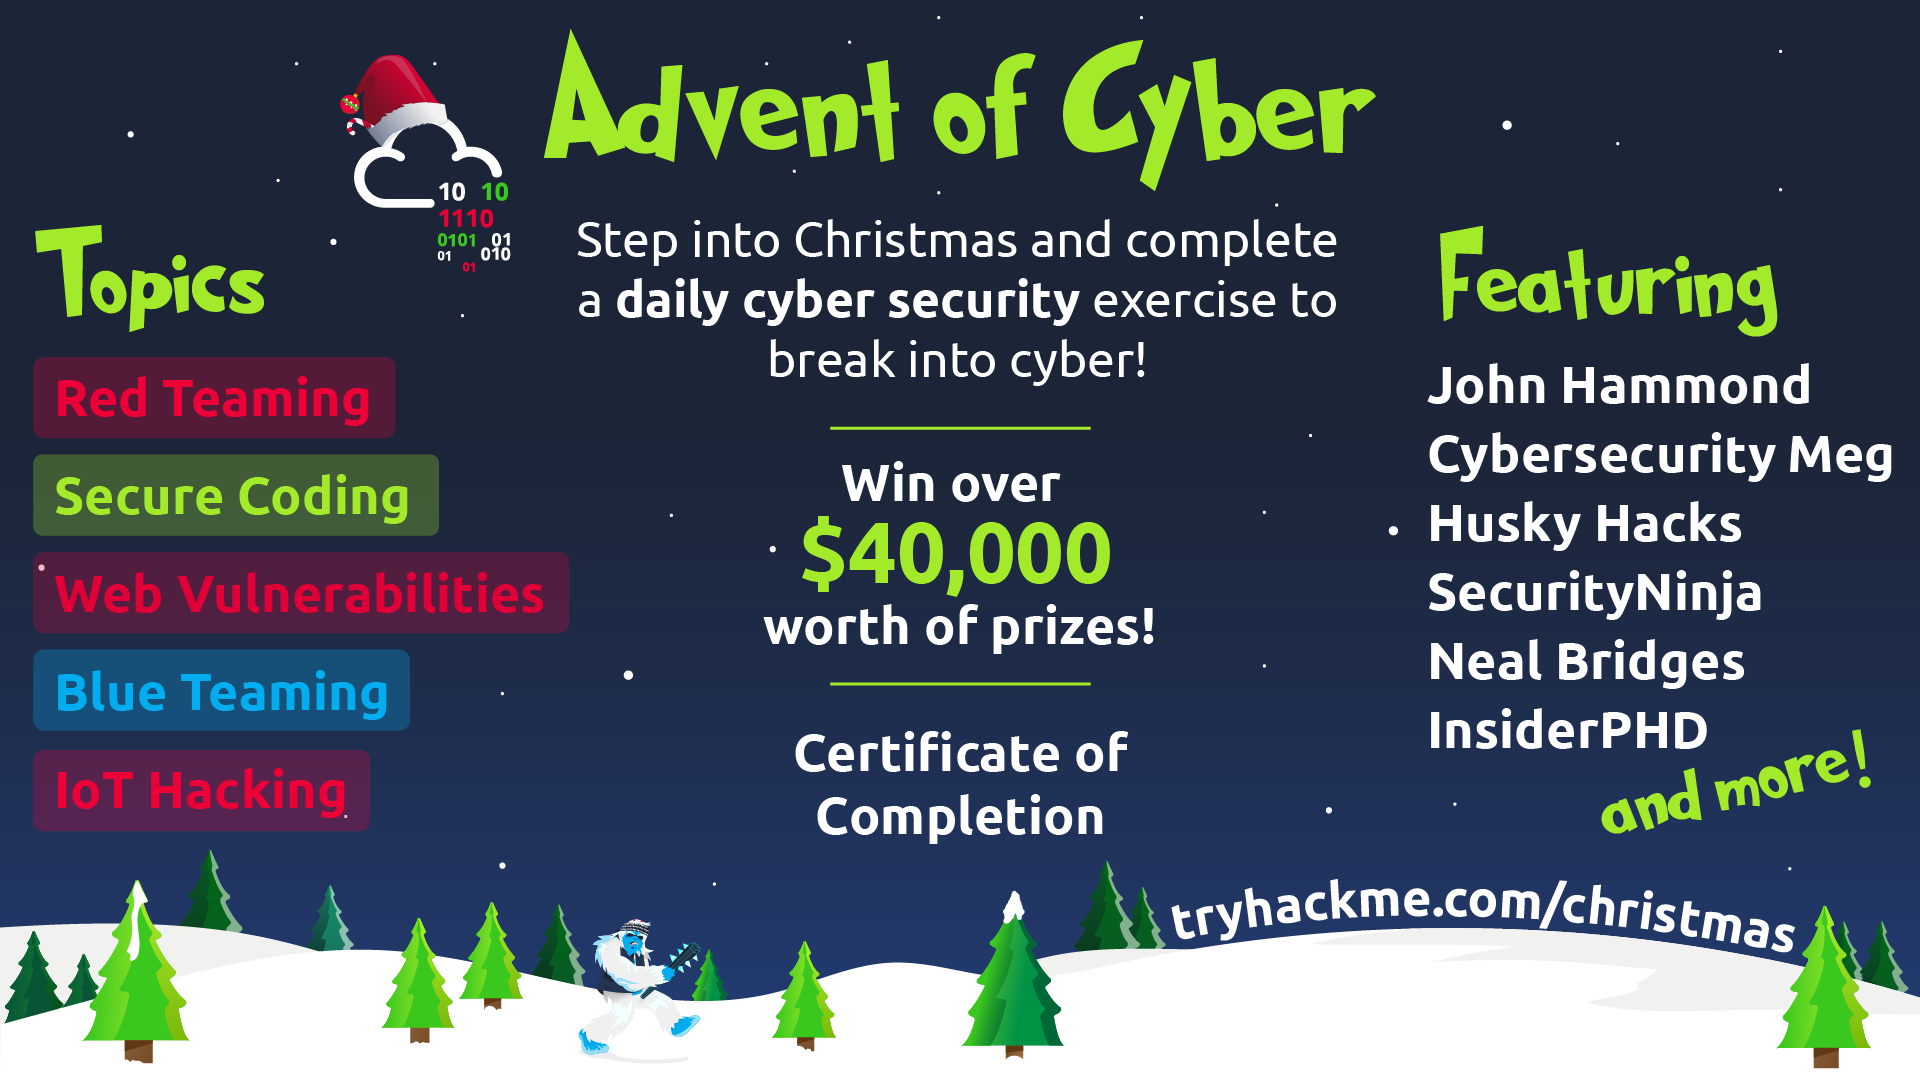 Take part in TryHackMe's Advent of Cyber 2022 to learn cyber security and win up to $40,000 worth of prizes